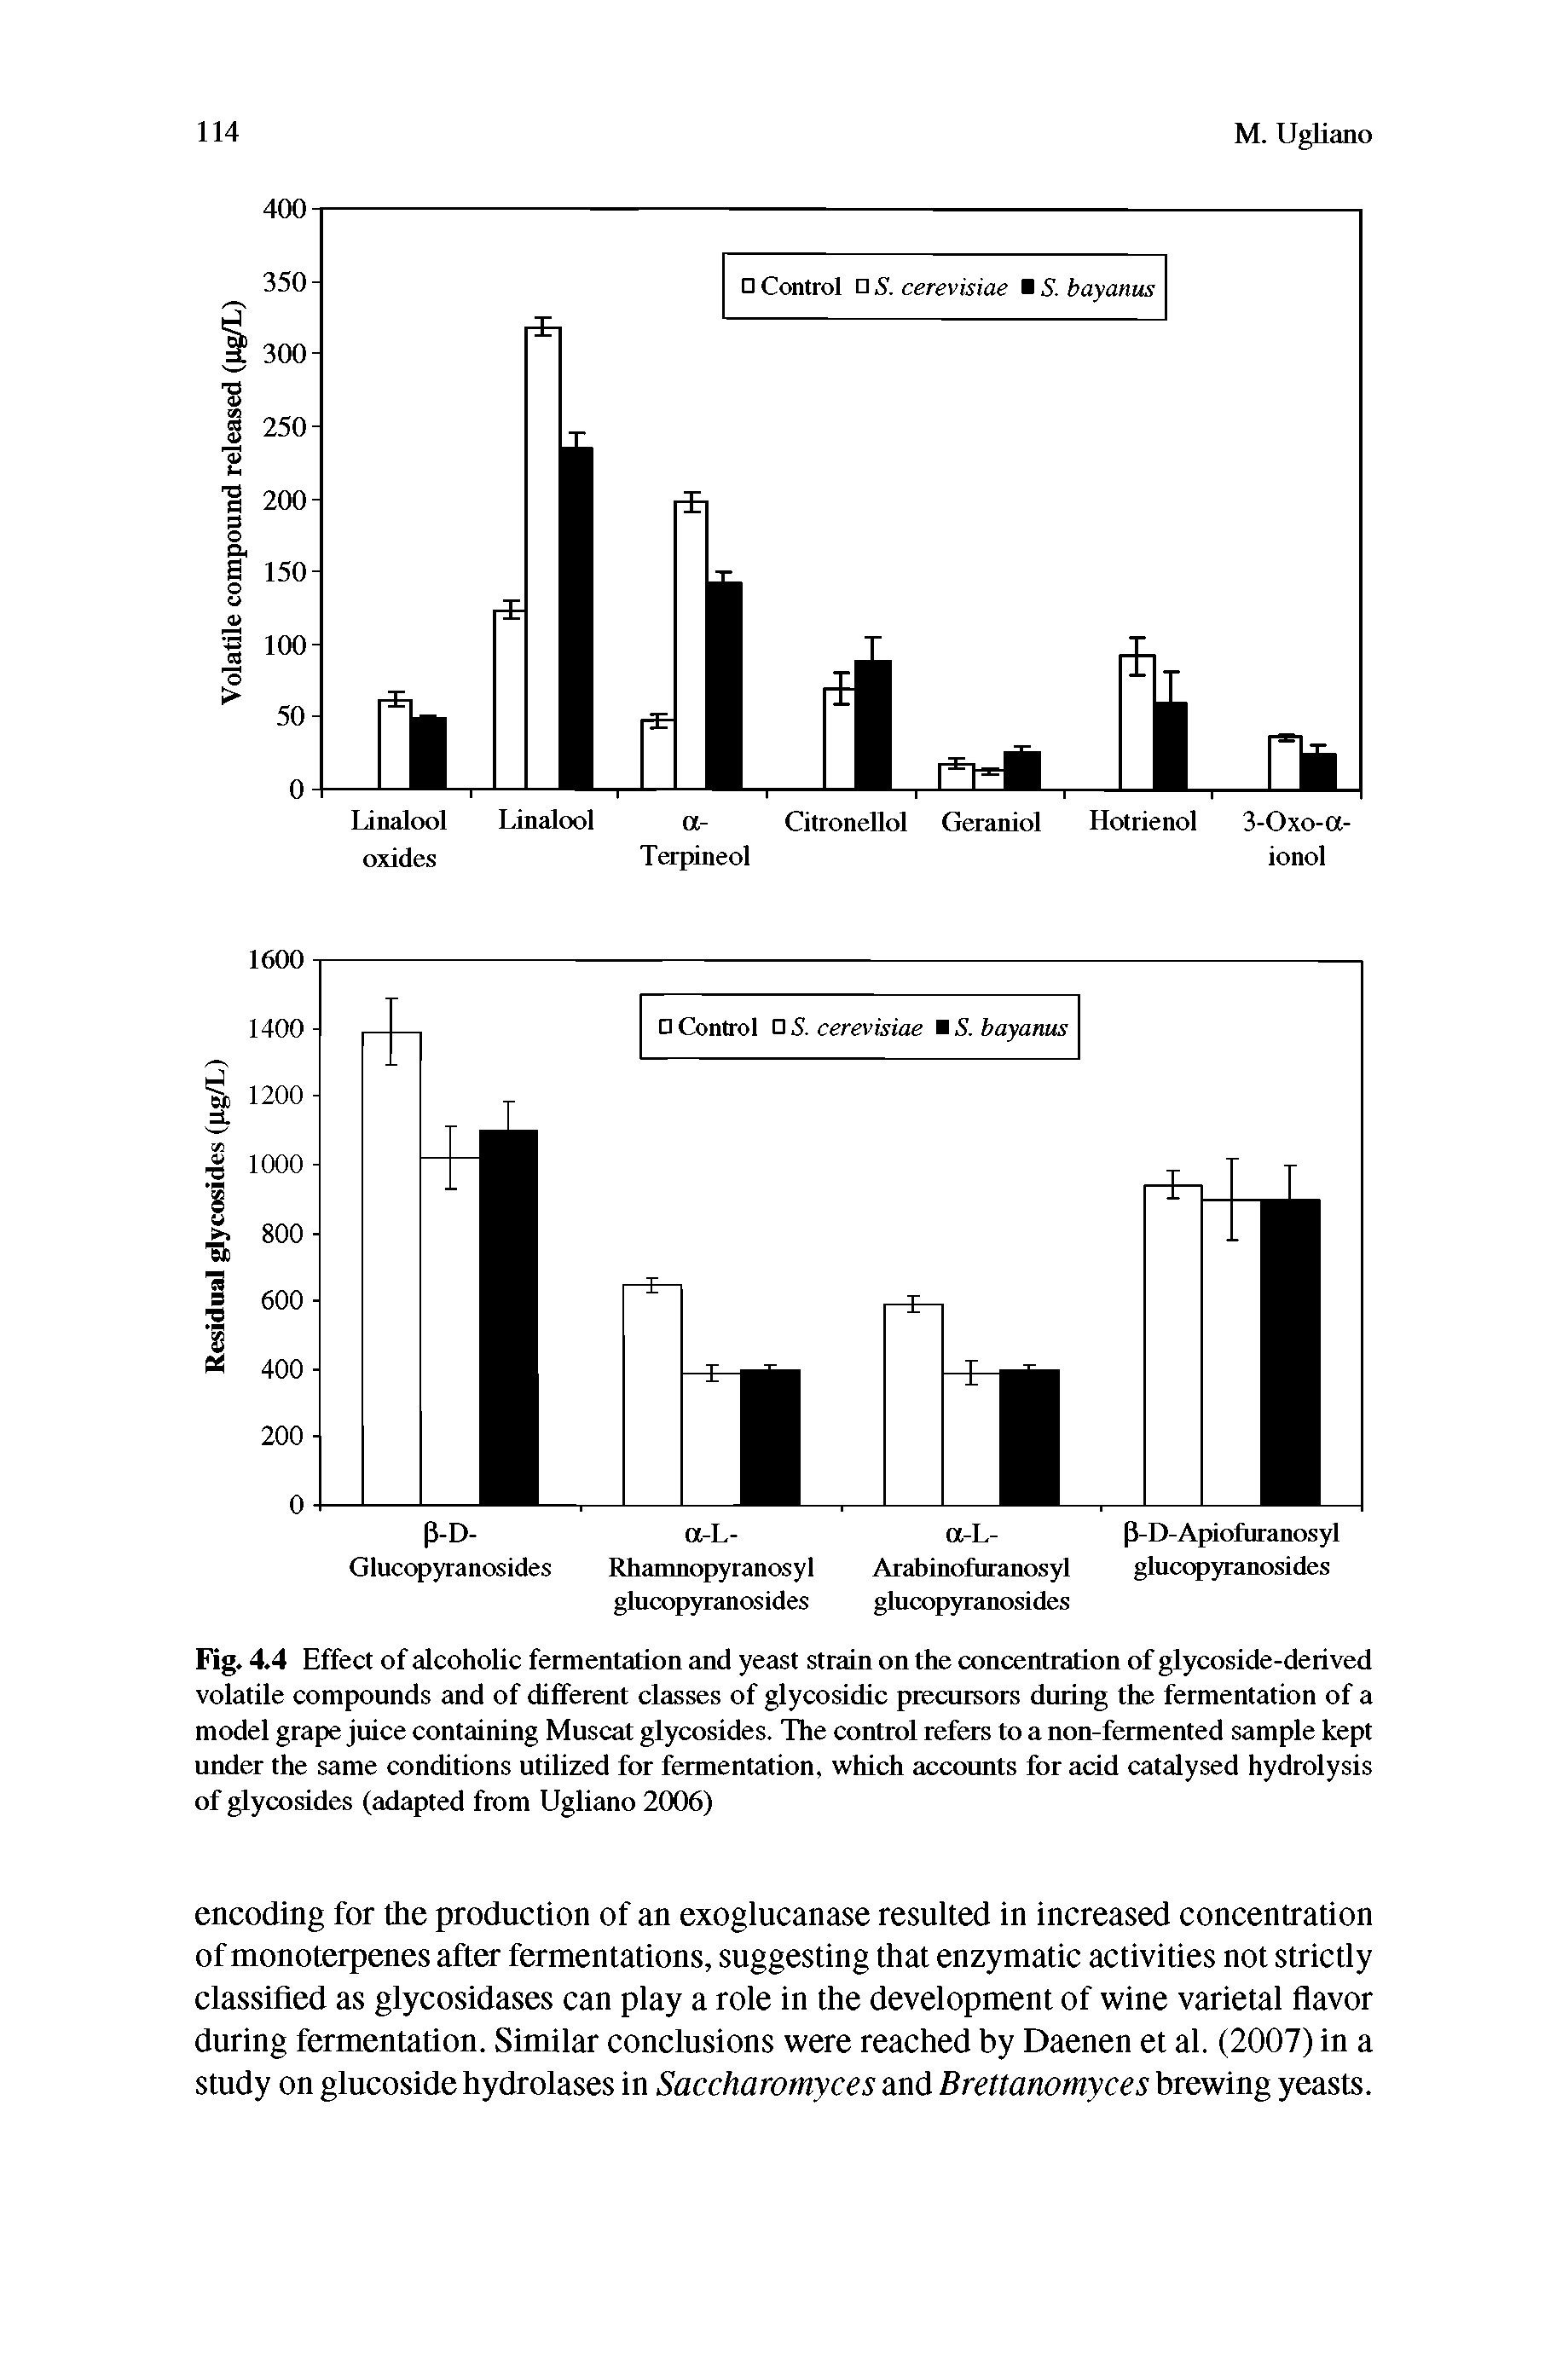 Fig. 4.4 Effect of alcoholic fermentation and yeast strain on the concentration of glycoside-derived volatile compounds and of different classes of glycosidic precursors during the fermentation of a model grape juice containing Muscat glycosides. The control refers to a non-fermented sample kept under the same conditions utilized for fermentation, which accounts for add catalysed hydrolysis of glycosides (adapted from Ugliano 2006)...